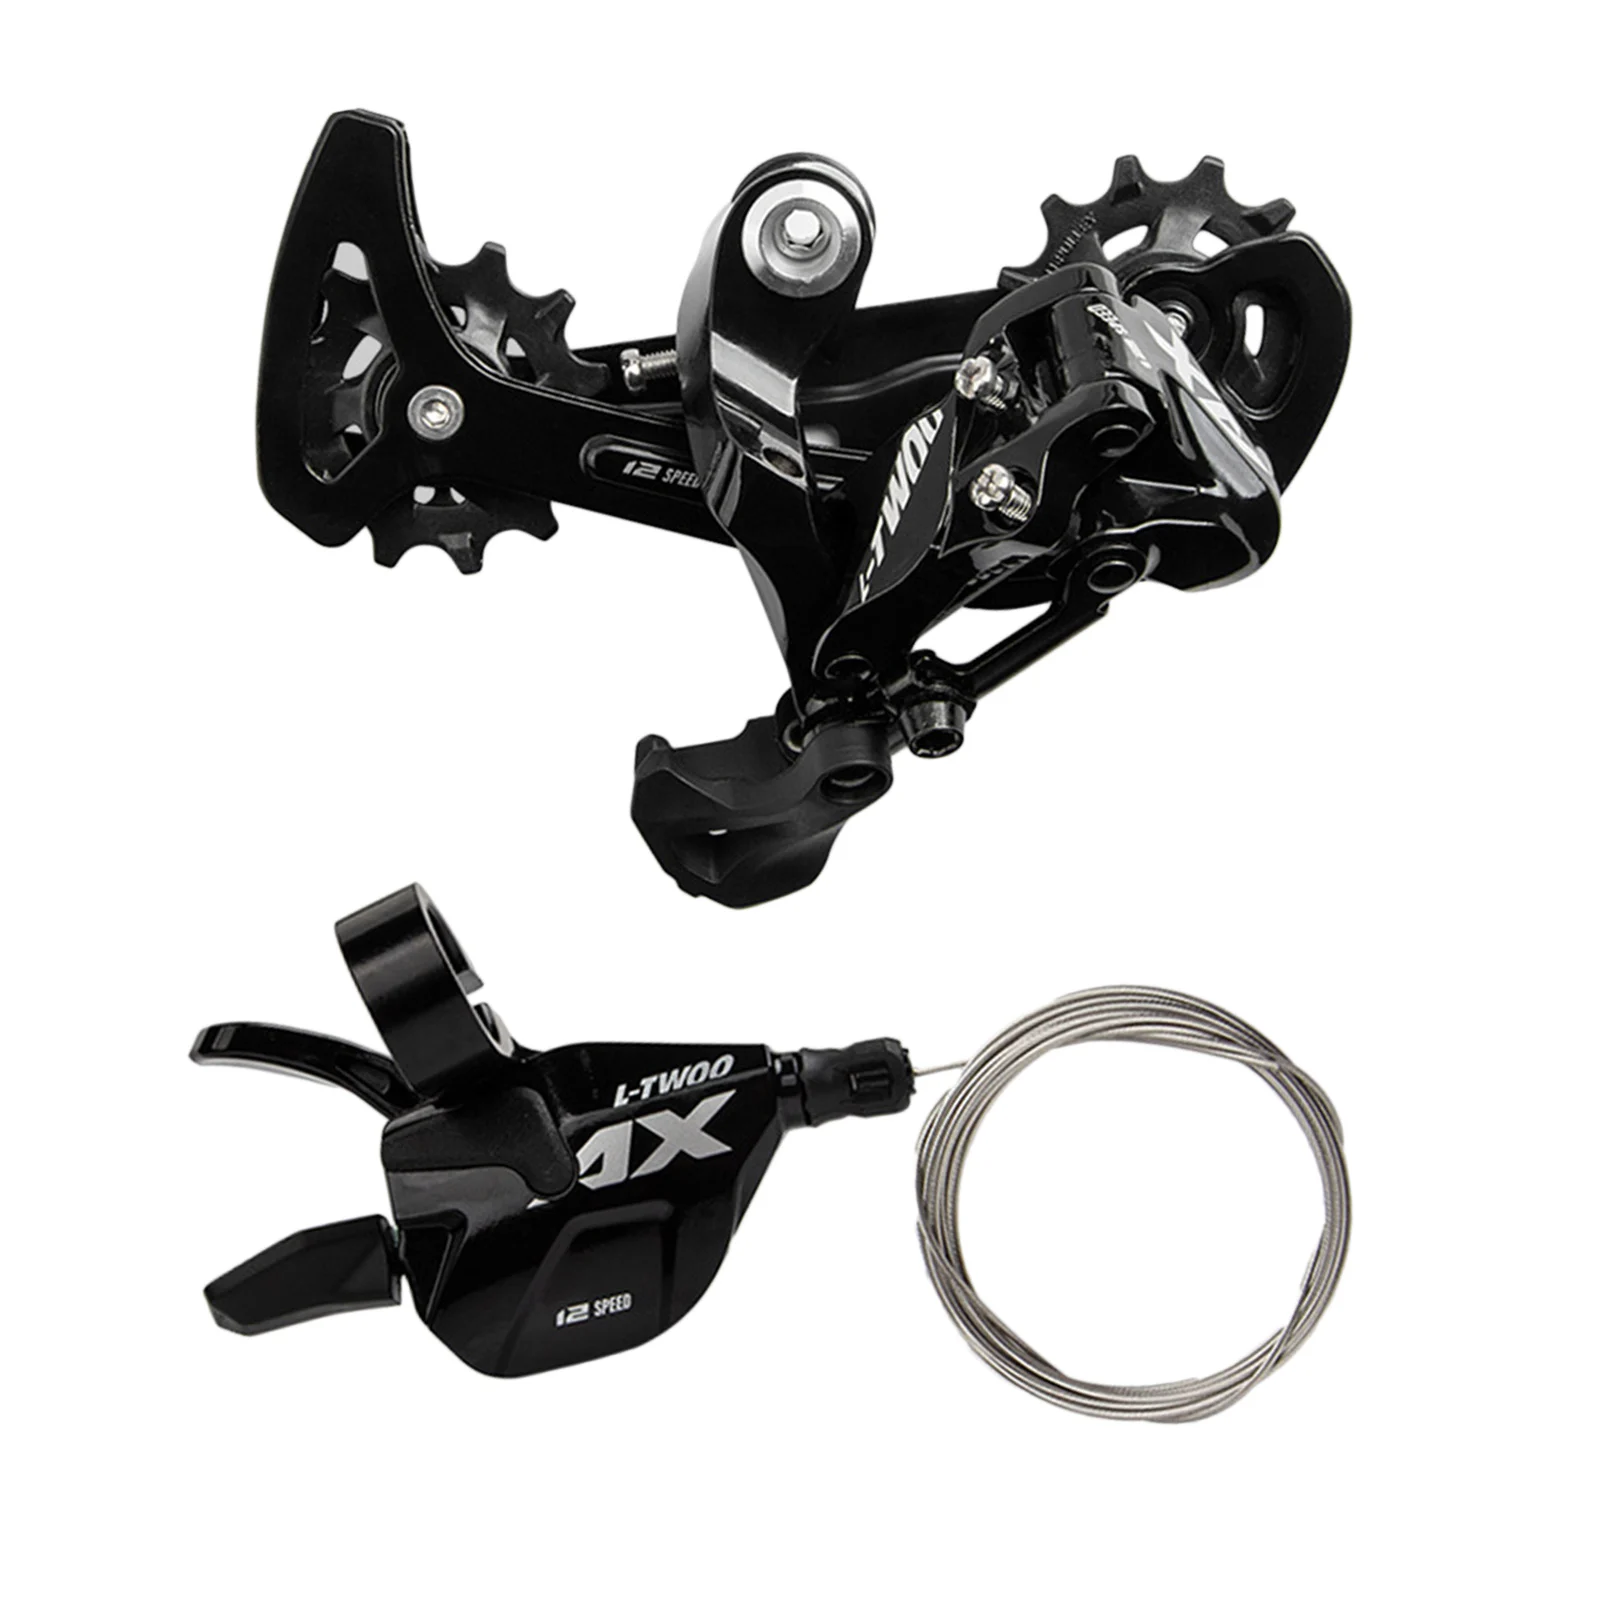 Bike Speed Shifter, Bicycle Right Shifter Rear Derailleur for Mountain Bike Bicycle